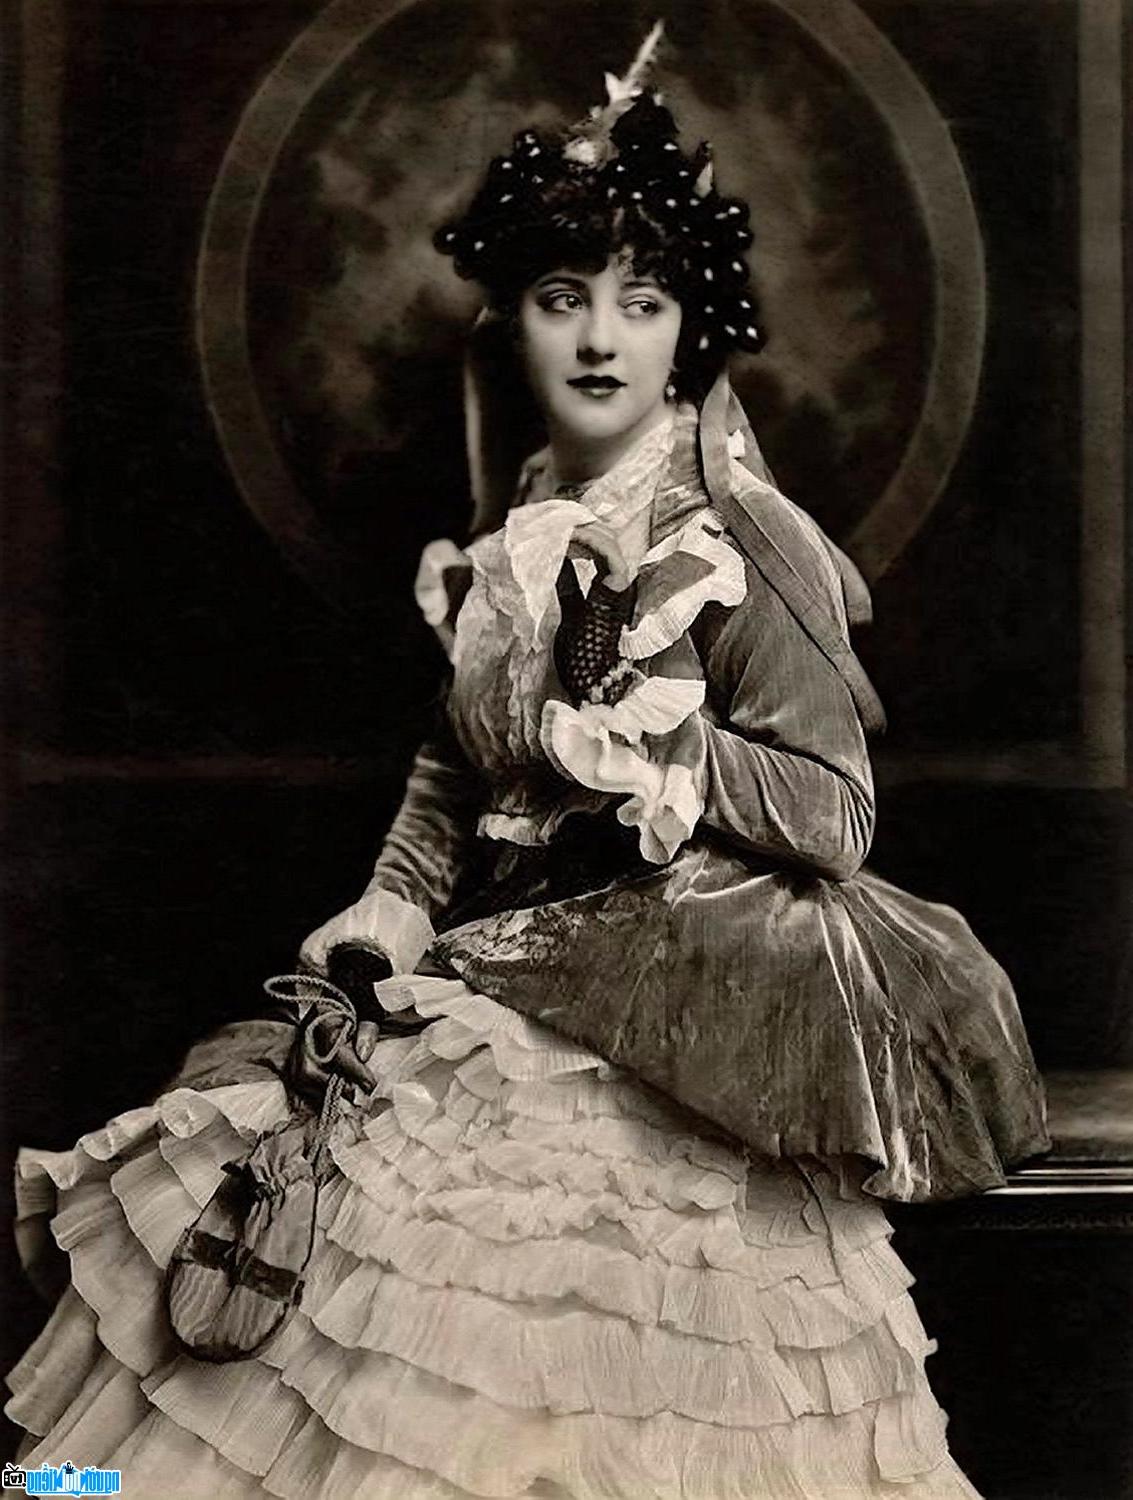 Splendid picture of Miss Helen Morgan when she was crowned